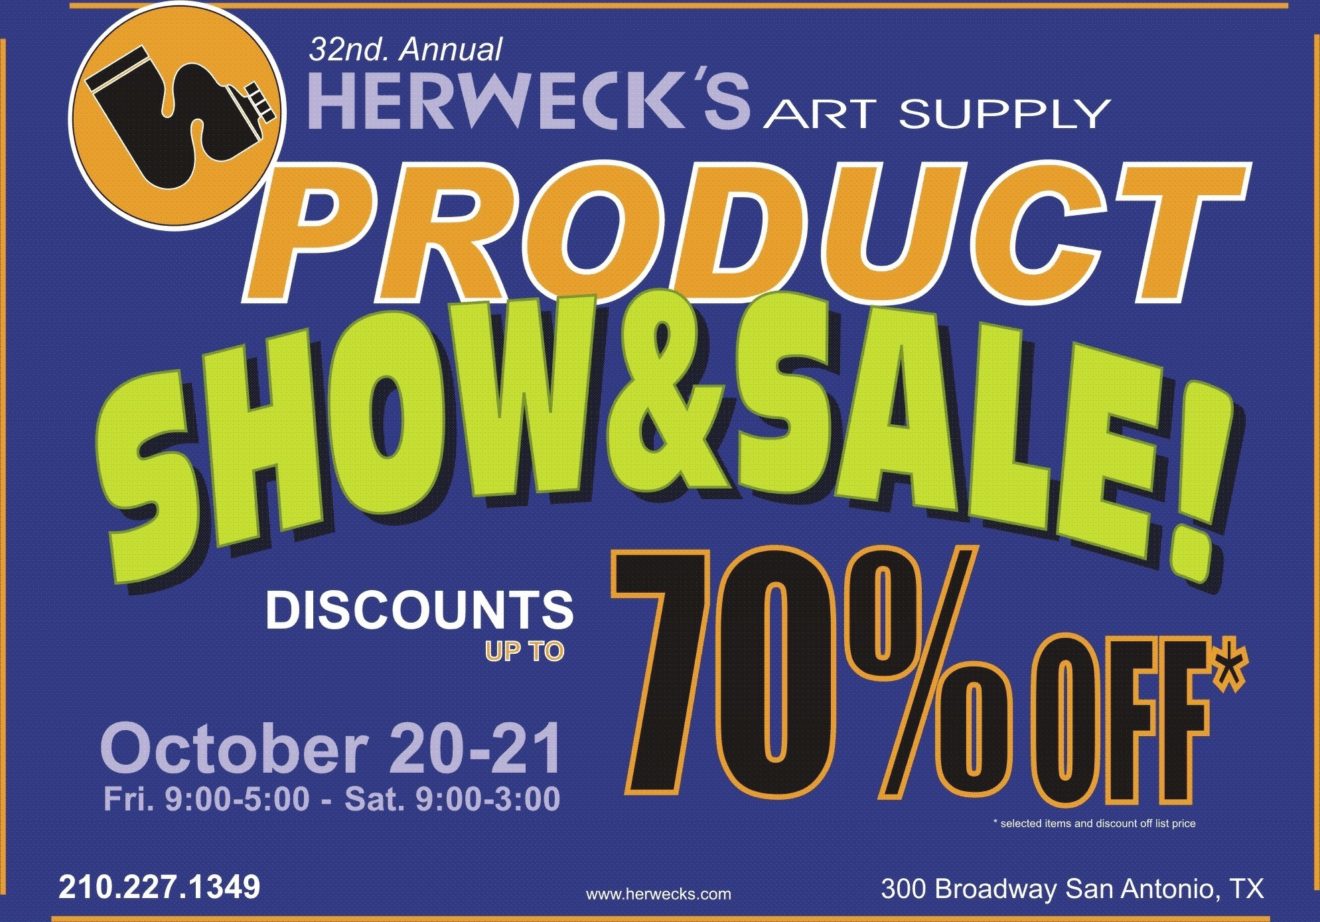 Herweck's 32nd Annual Art Supply Product Show and Sale